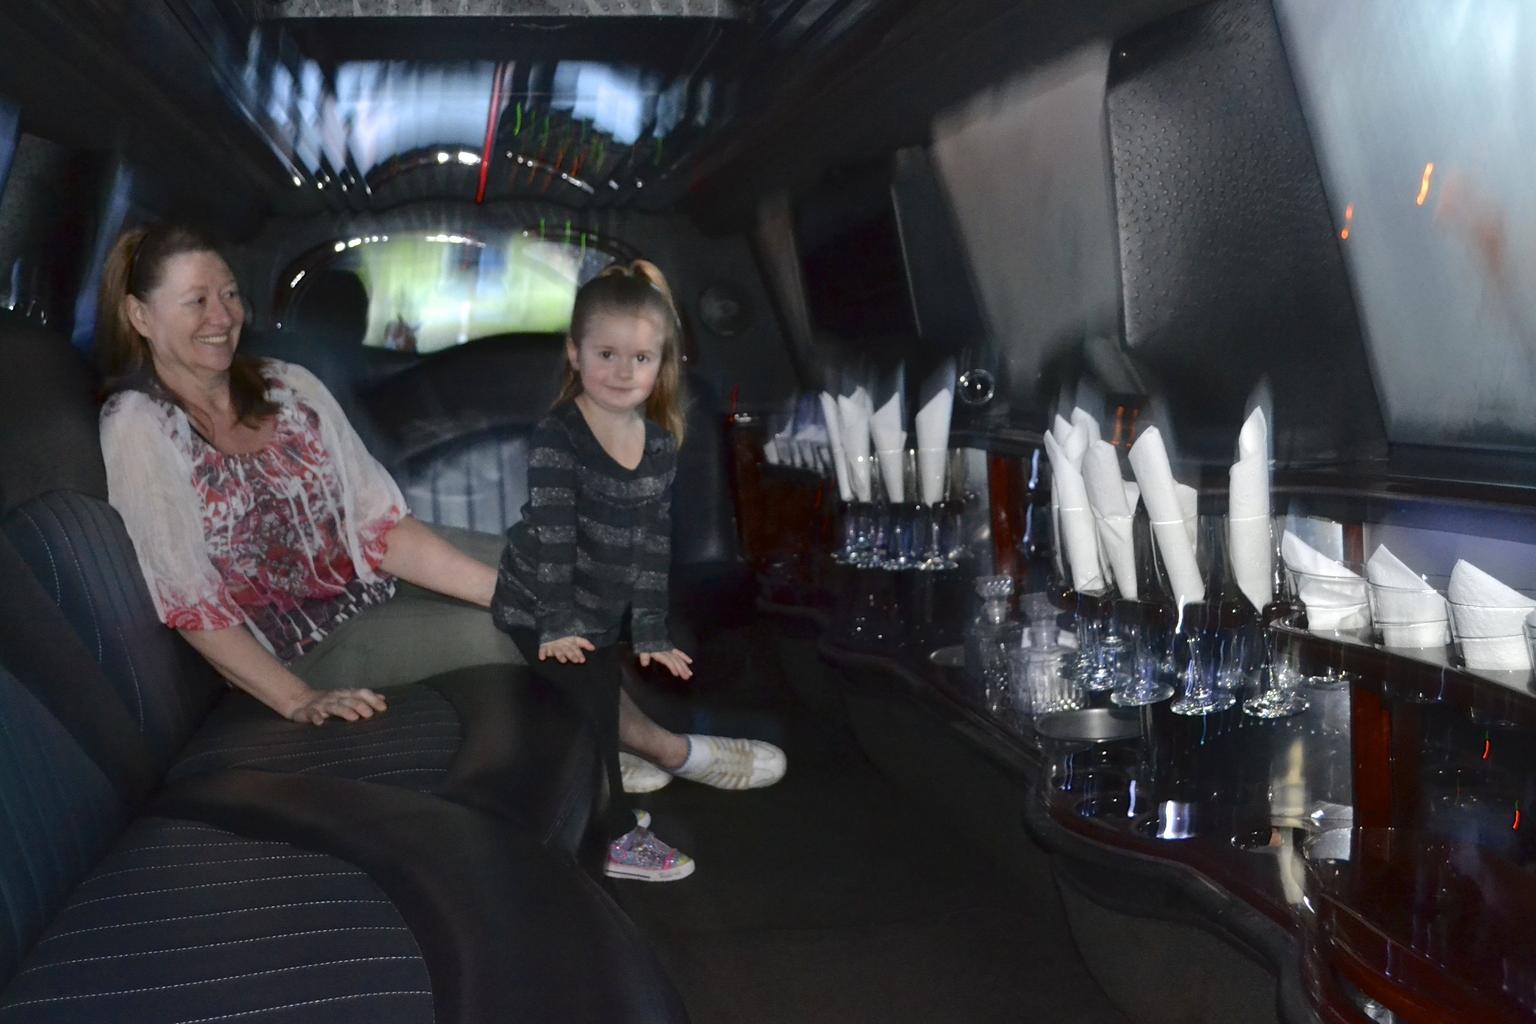 Our limo ride